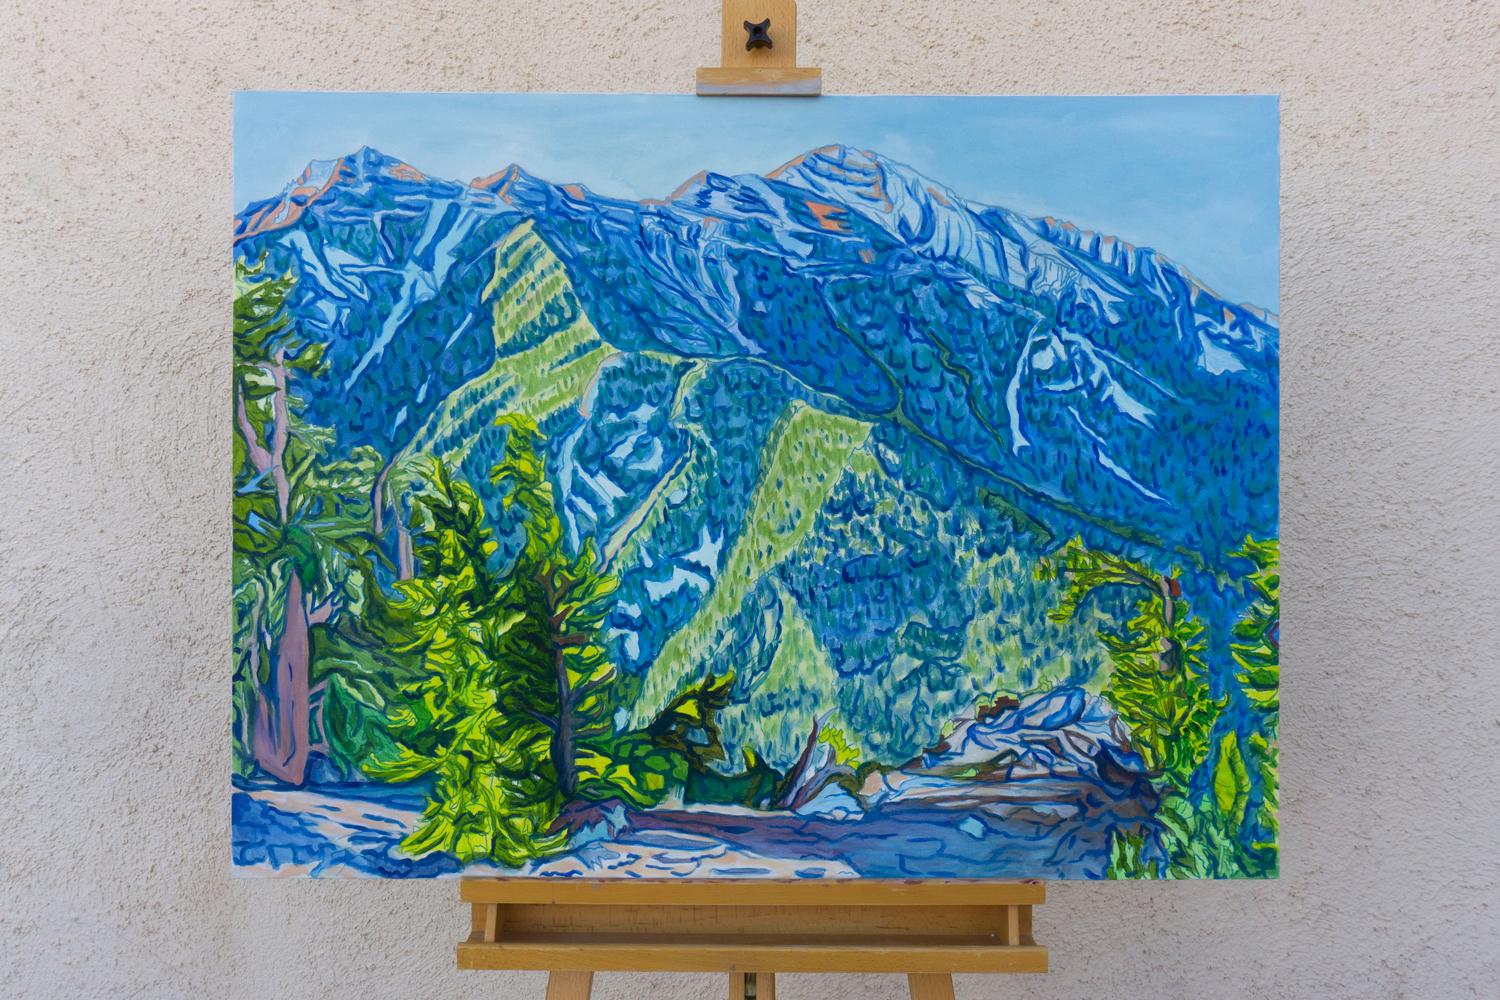 <p>Artist Comments<br>Artist Crystal DiPietro captures a majestic mountain range inspired by an immersive backpacking adventure. Her loose brushstrokes create a sense of movement and spontaneity in the painting, mimicking the organic shapes of the